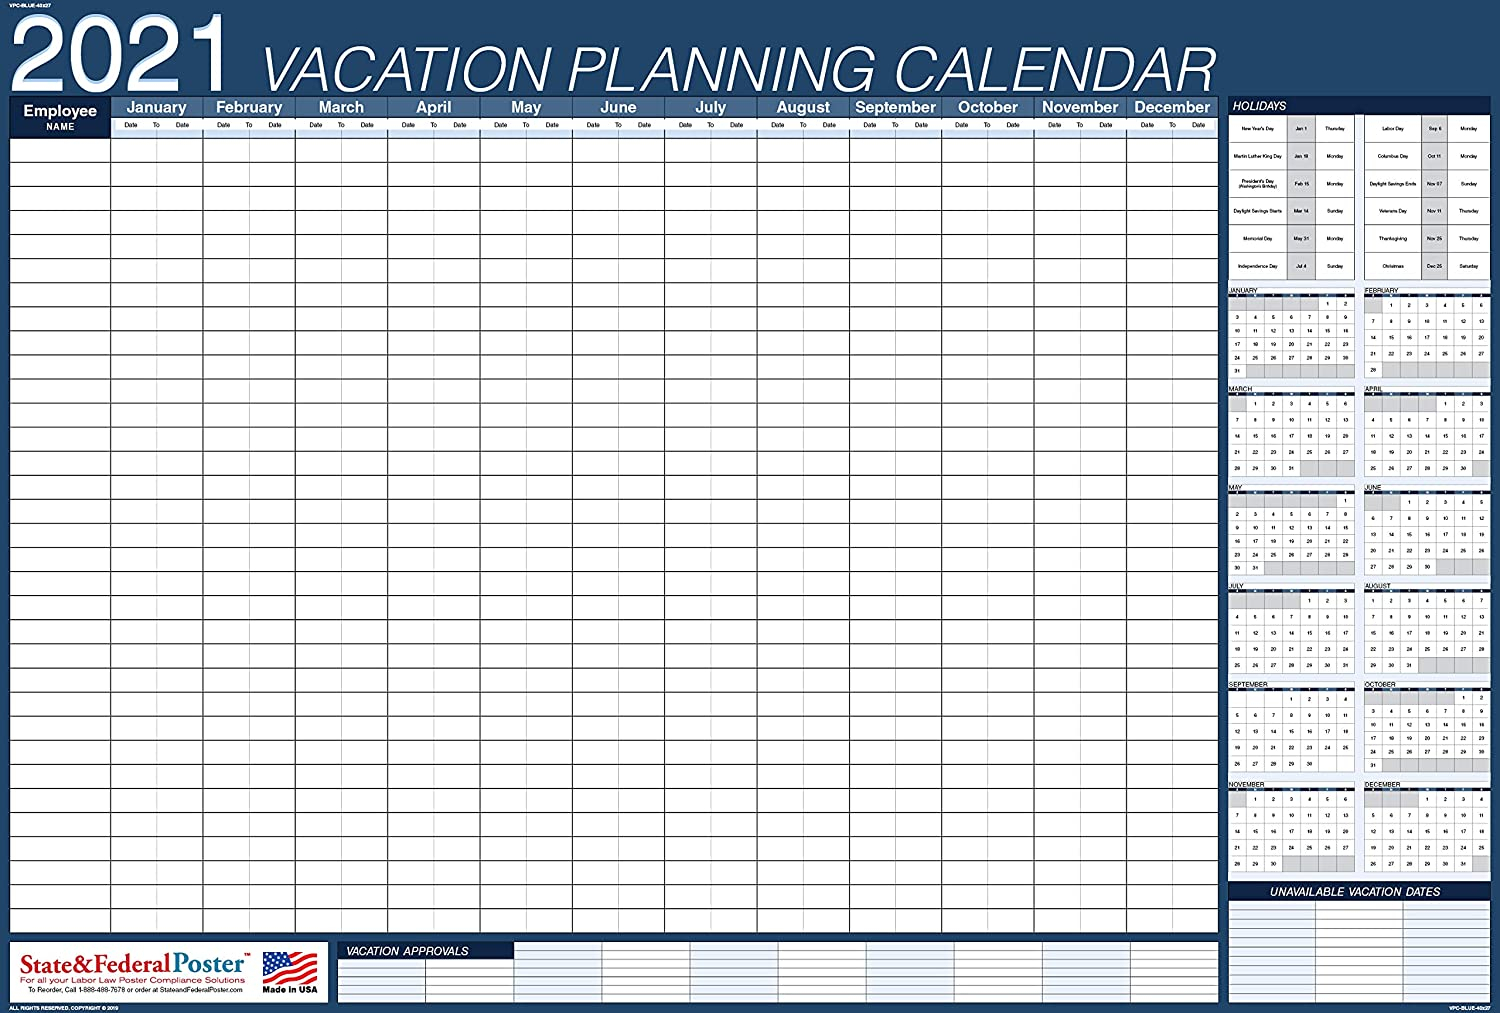 Annual Leave Tracker Printable